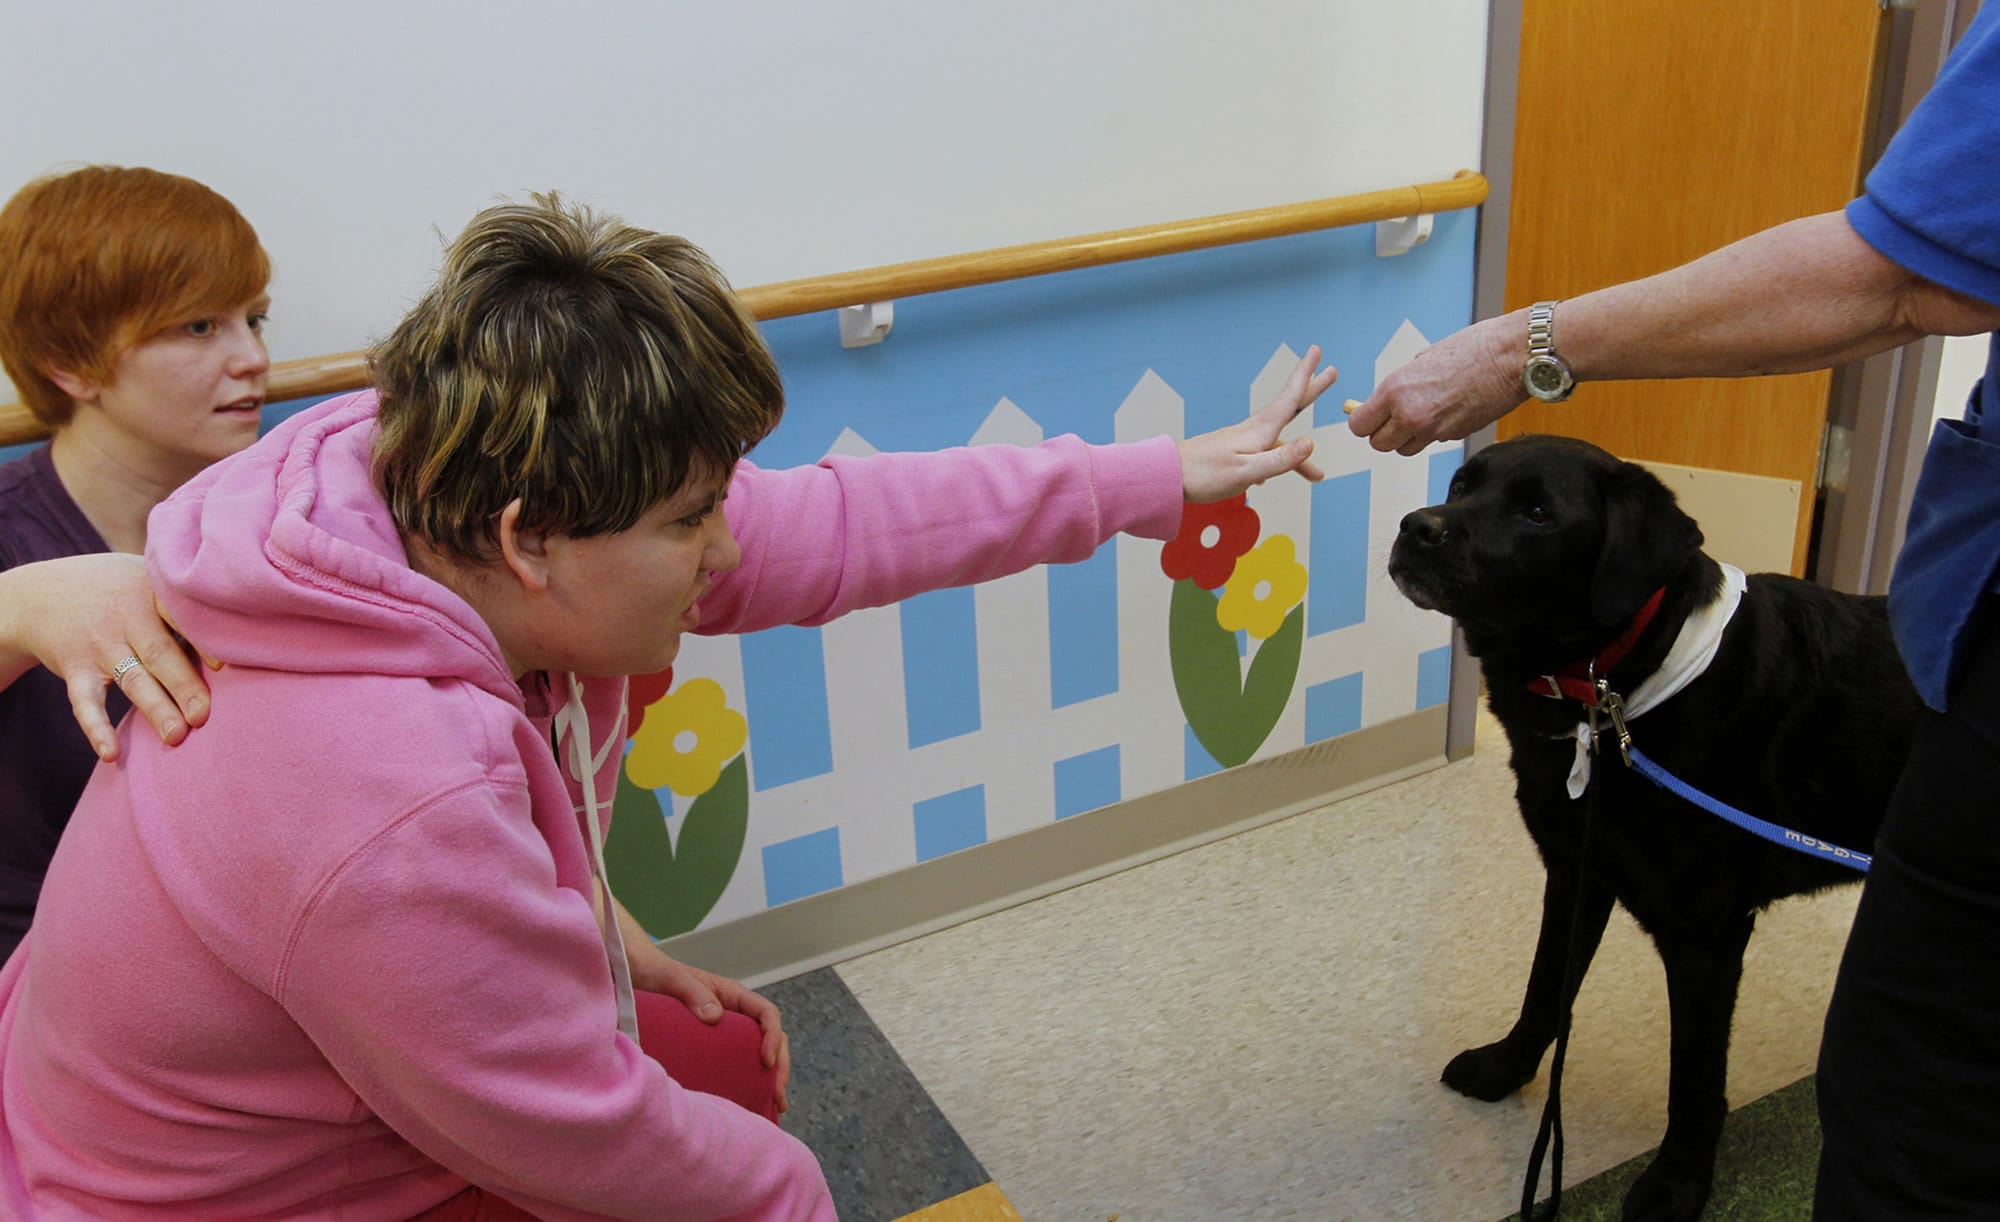 Therapy dog Tank gets a treat from patient Allison Hill, who has cerebral palsy, who is working with physical therapist Kate Patton at the Akron Children's Hospital in Akron, Ohio.